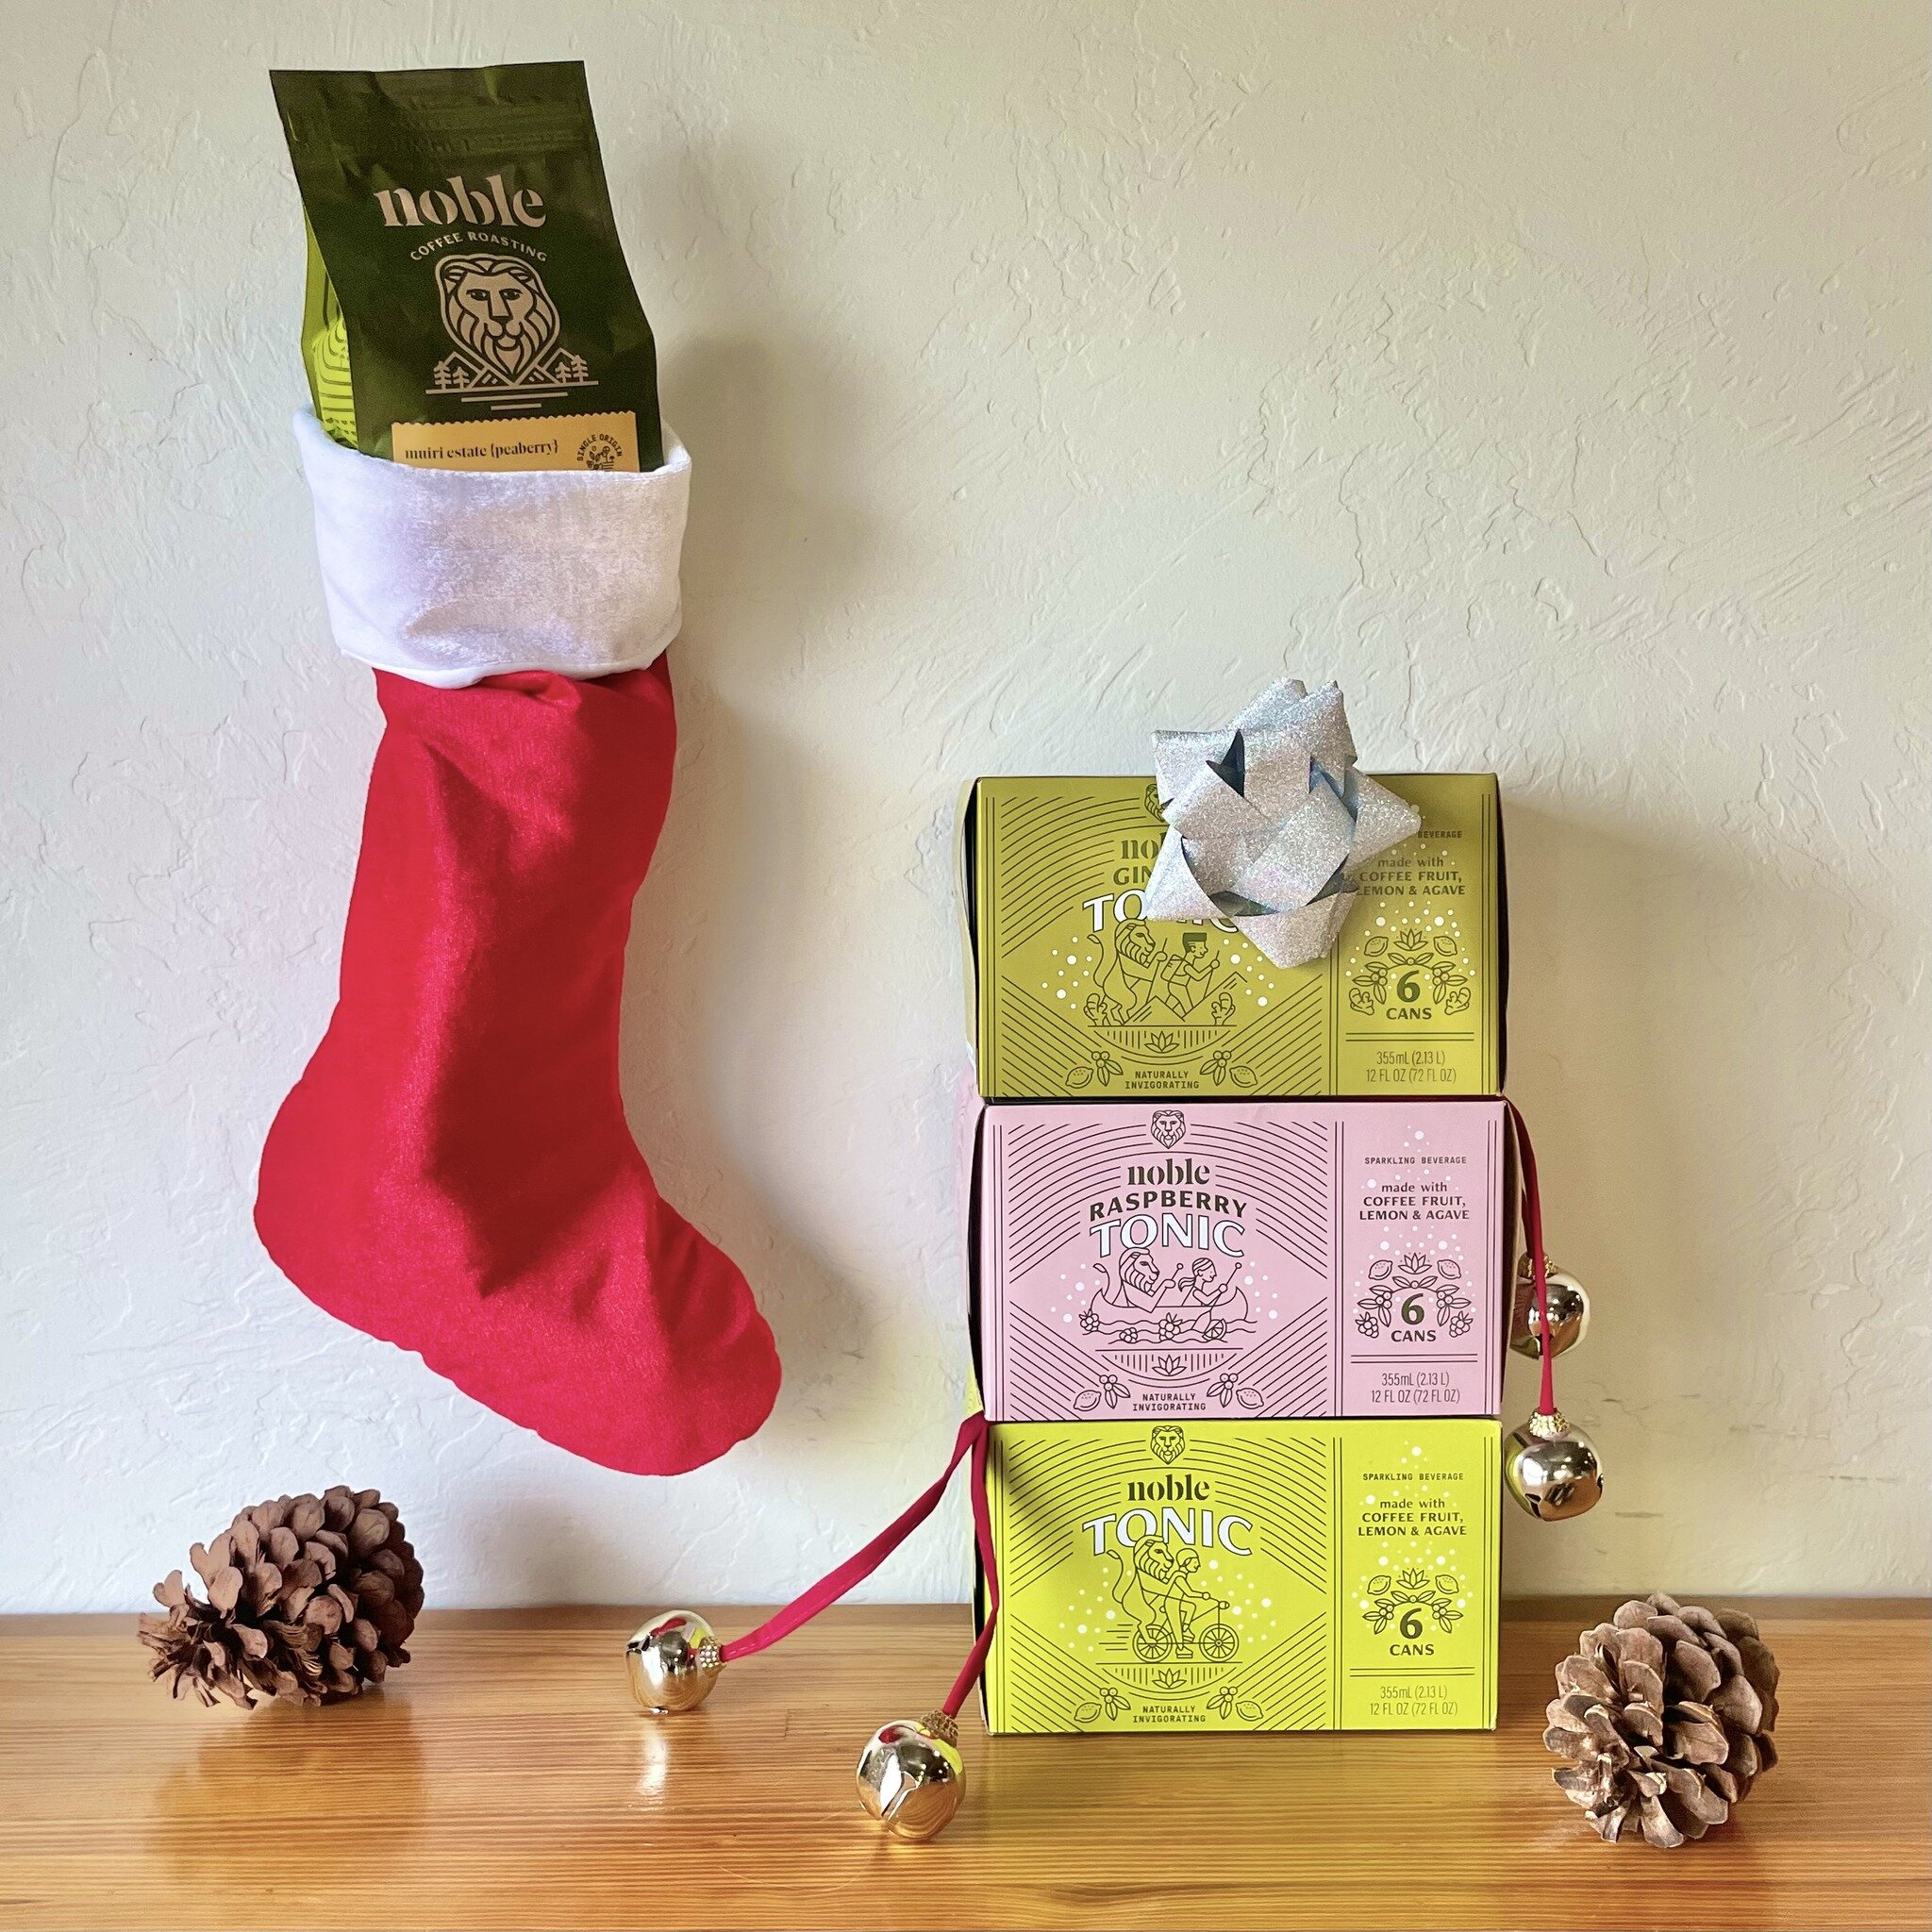 The holiday season is the perfect time to share your favorite things with others. Share the joy of Noble Tonic and delicious coffee. We&rsquo;ll handle the shipping for you - just $5 for all orders, any size, anywhere in the U.S.

Order by December 1